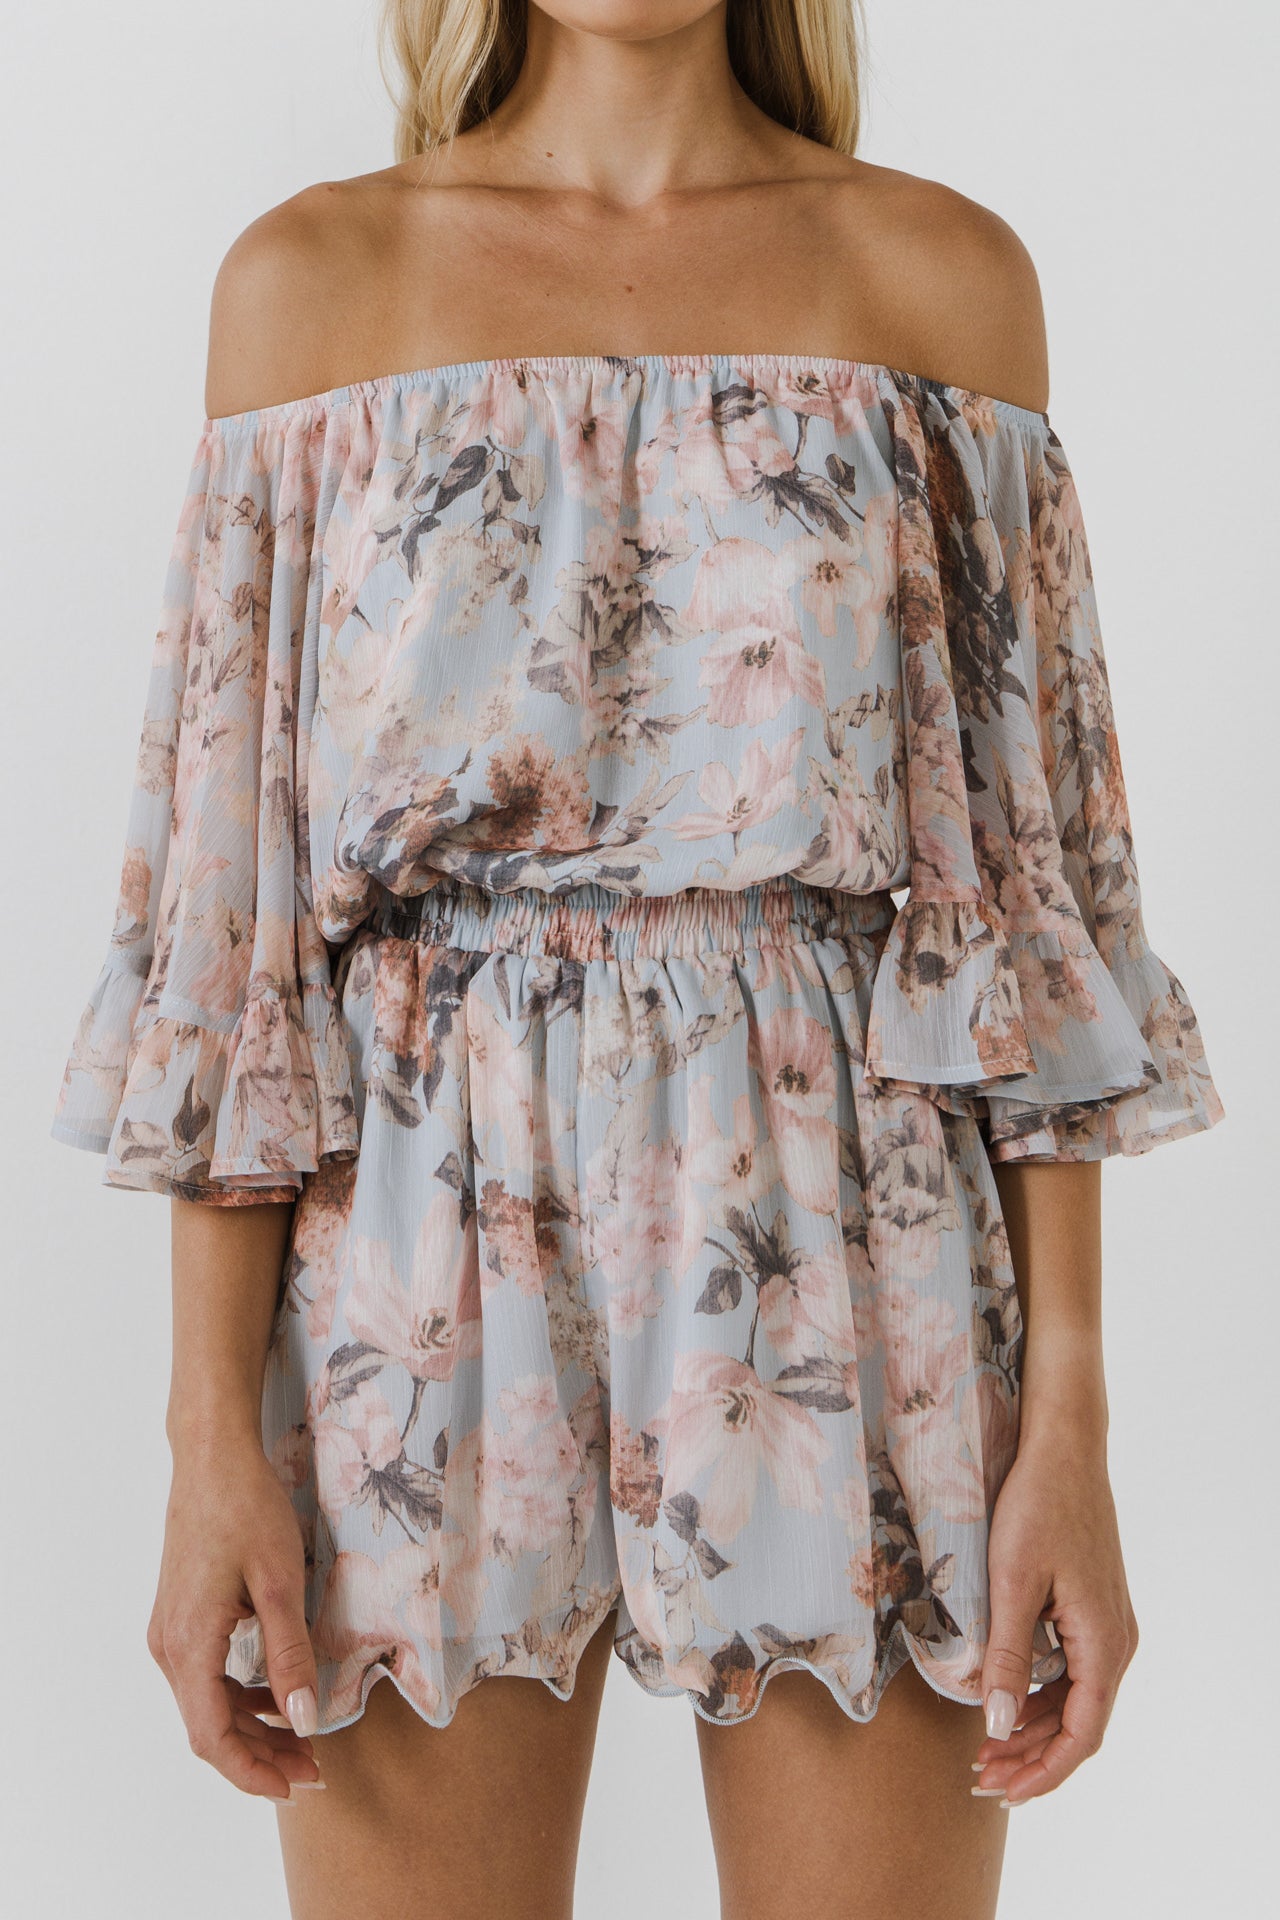 FREE THE ROSES - Flowy Floral Romper - ROMPERS available at Objectrare